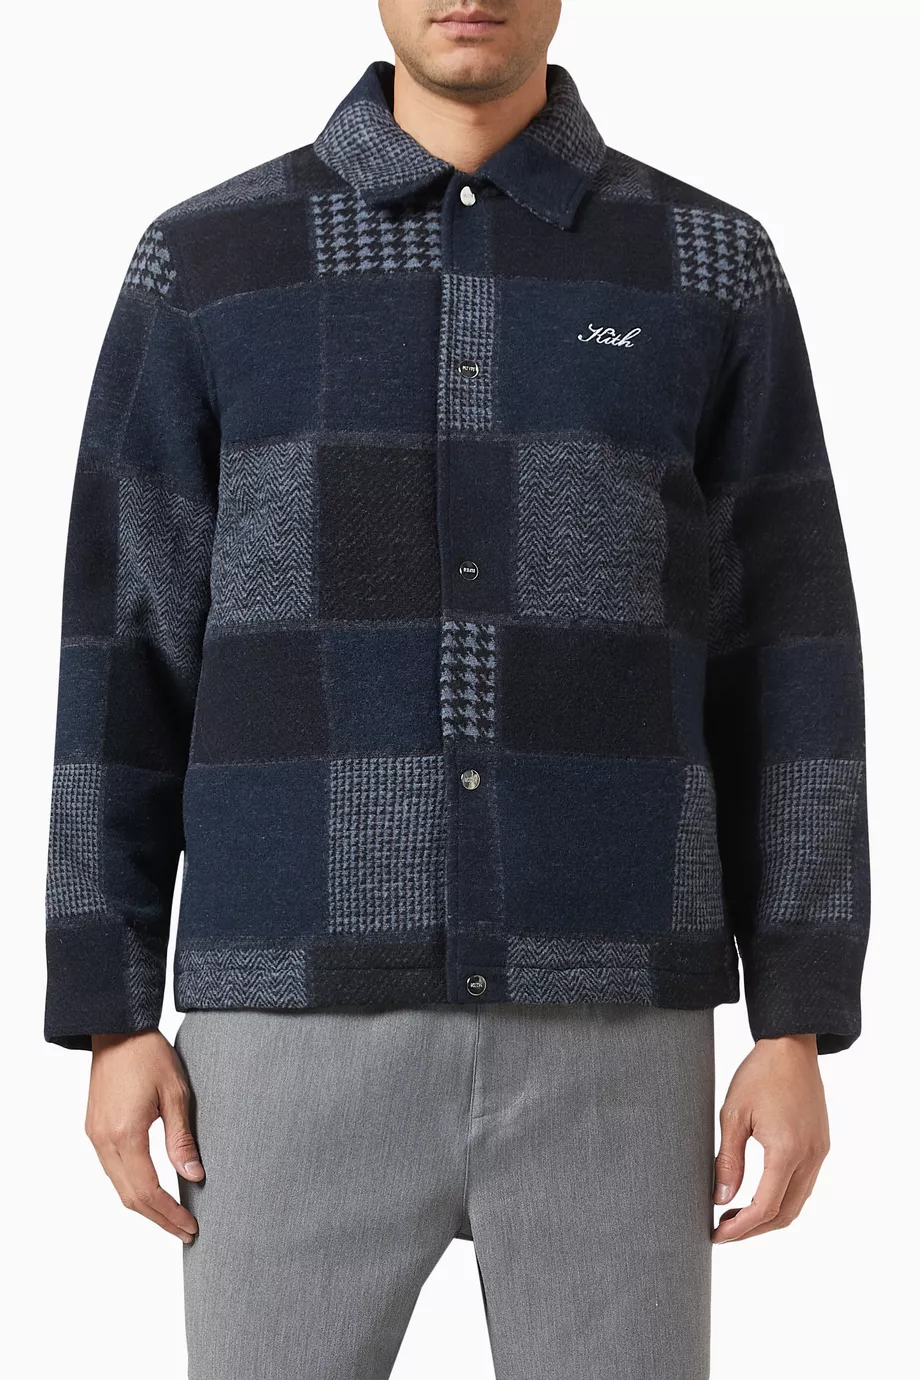 Buy Kith Blue Patchwork Coaches Jacket in Wool-blend Online for ...